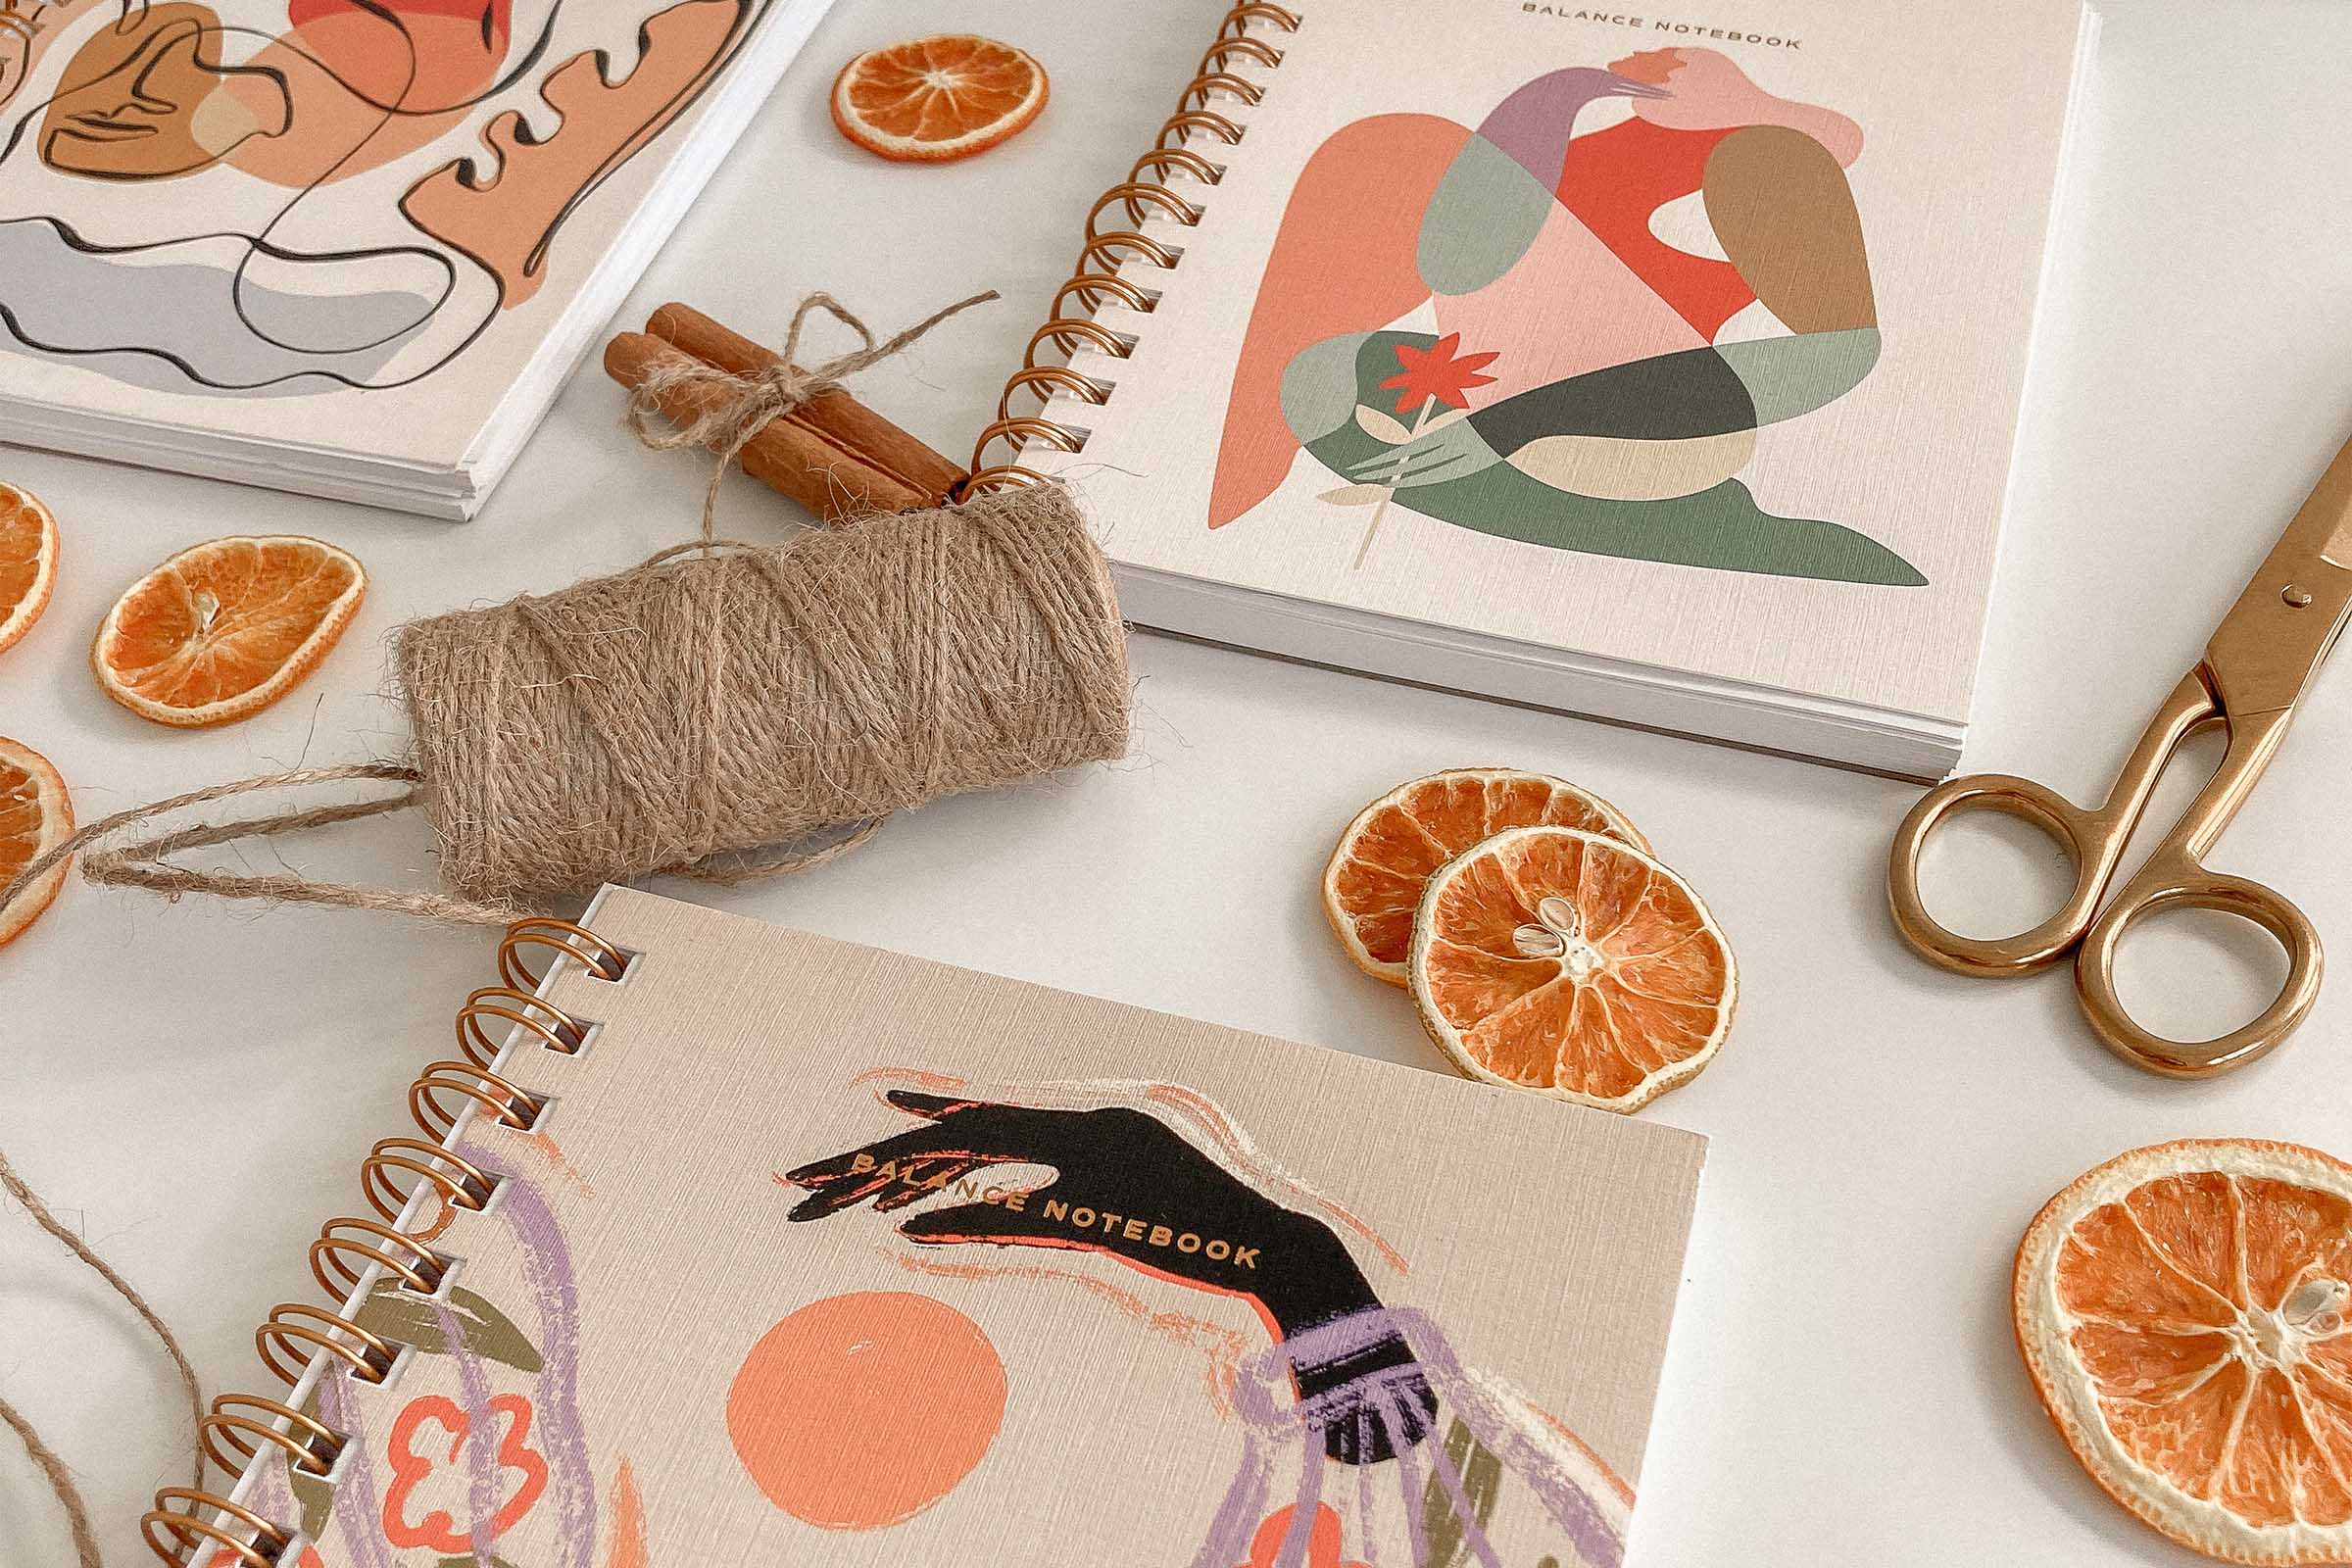 Meet the New Balance Notebook and the Artists Behind the Collaboration